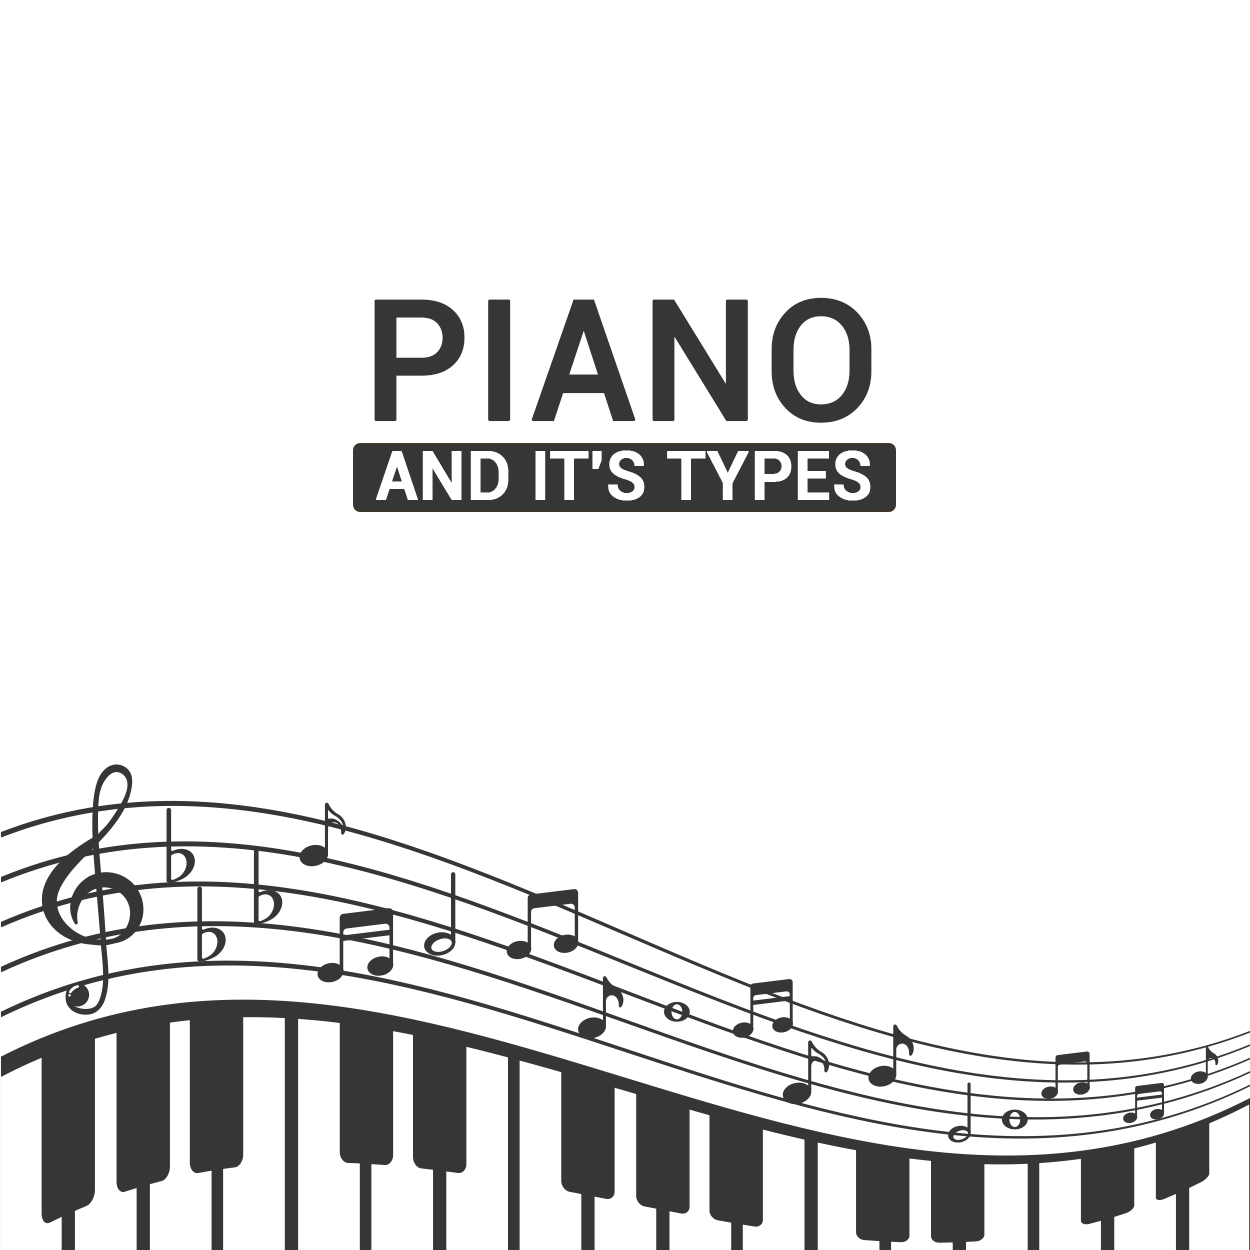 PIANO AND ITS TYPES